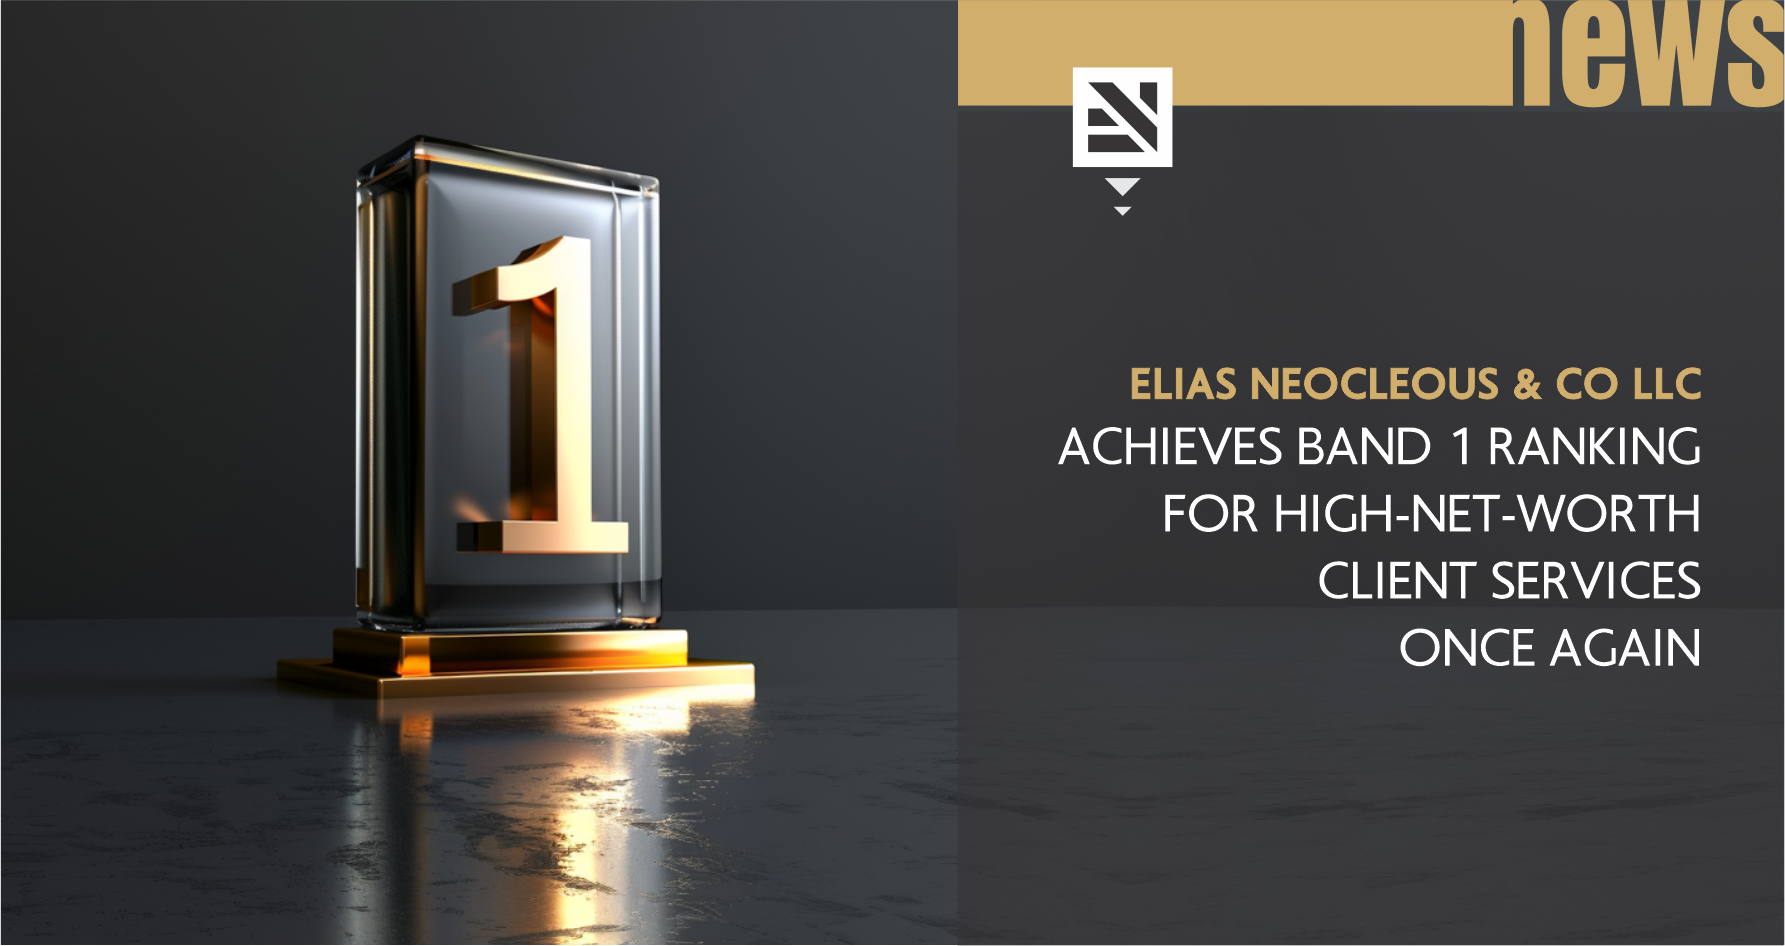 Elias Neocleous & Co LLC achieves Band 1 ranking for High-Net-Worth client services once again